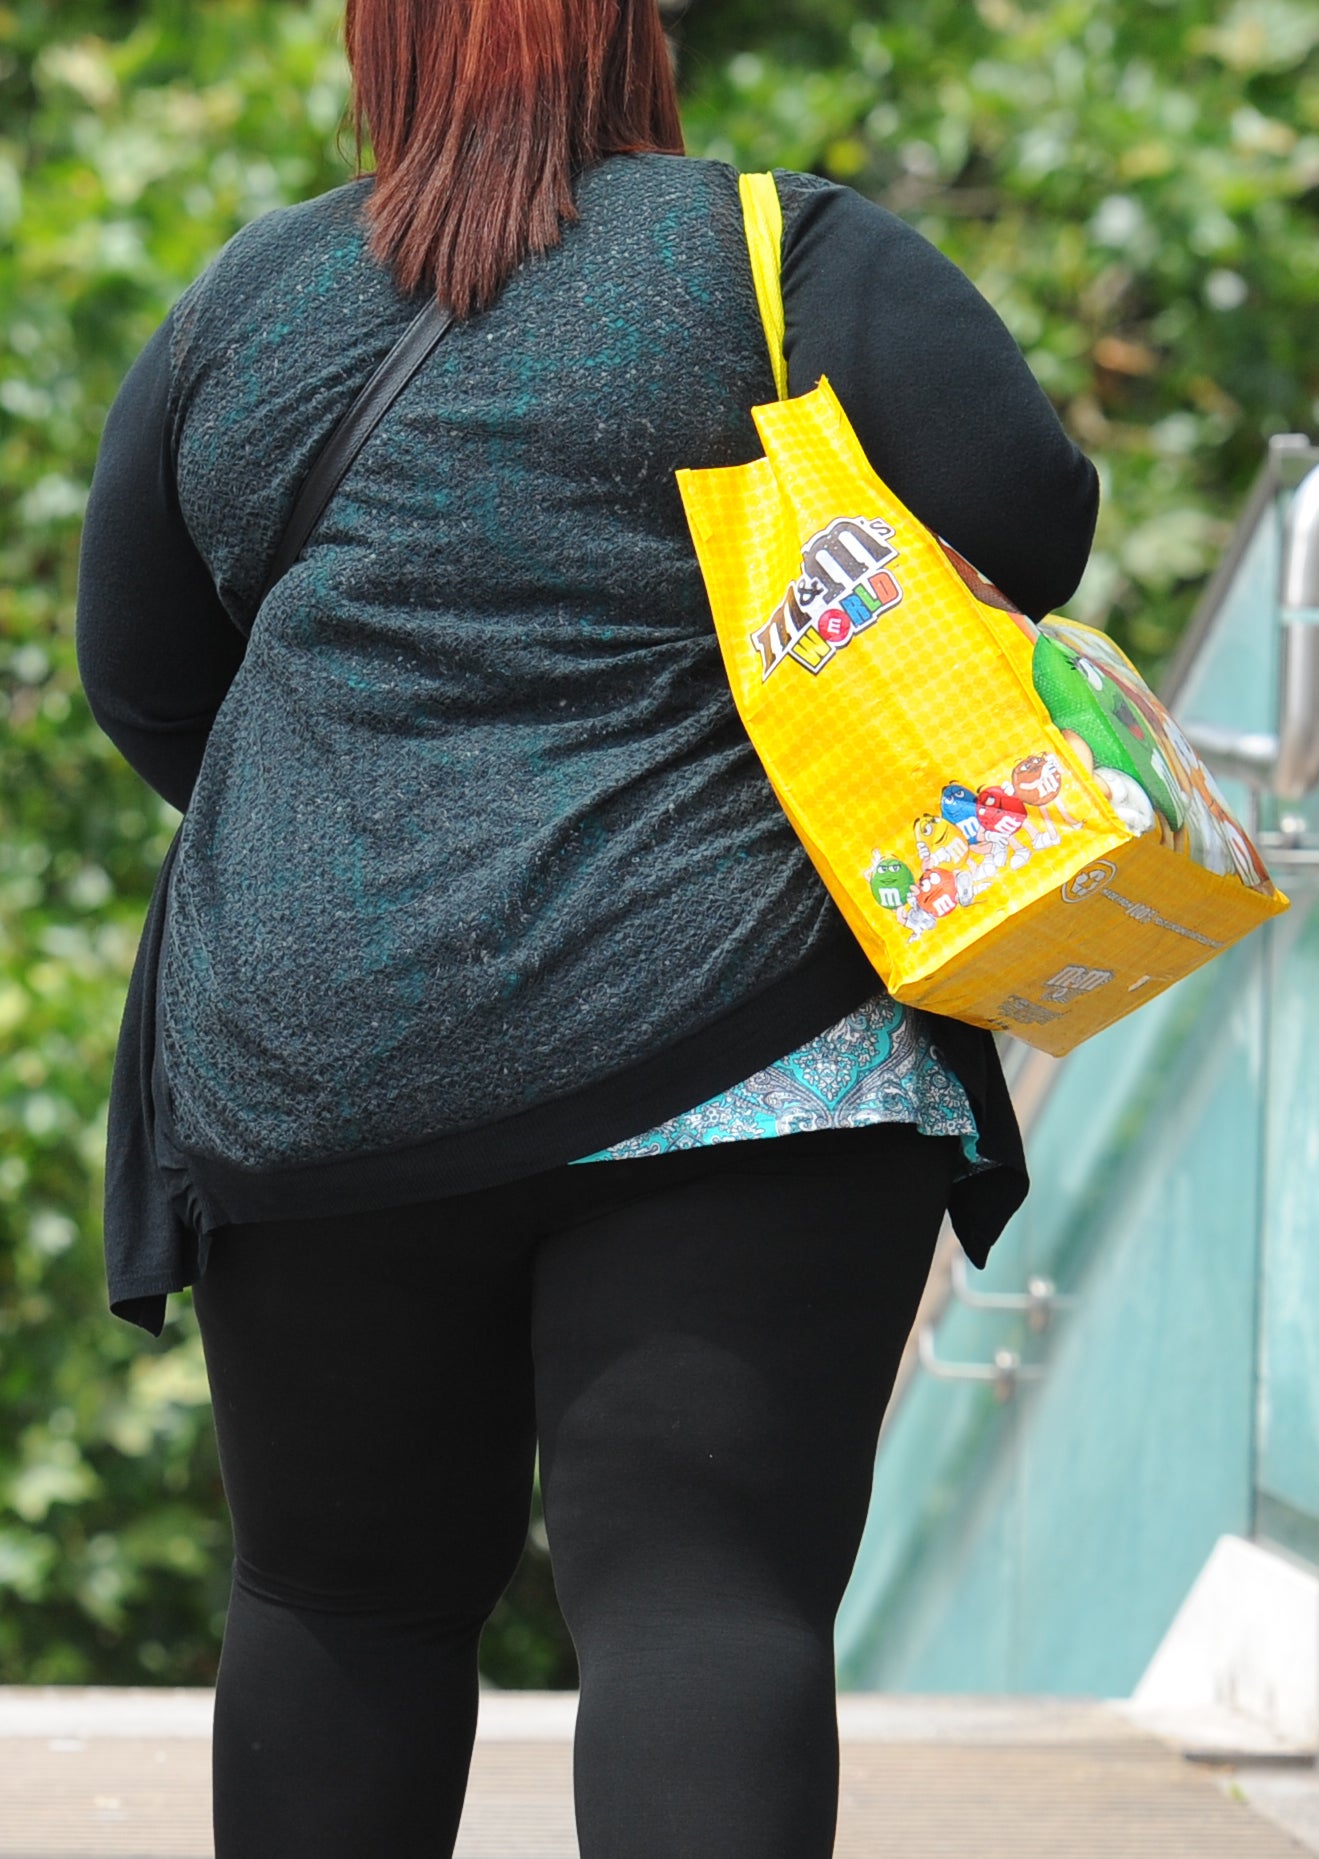 Stock photo of an overweight woman in London (Lauren Hurley/PA)